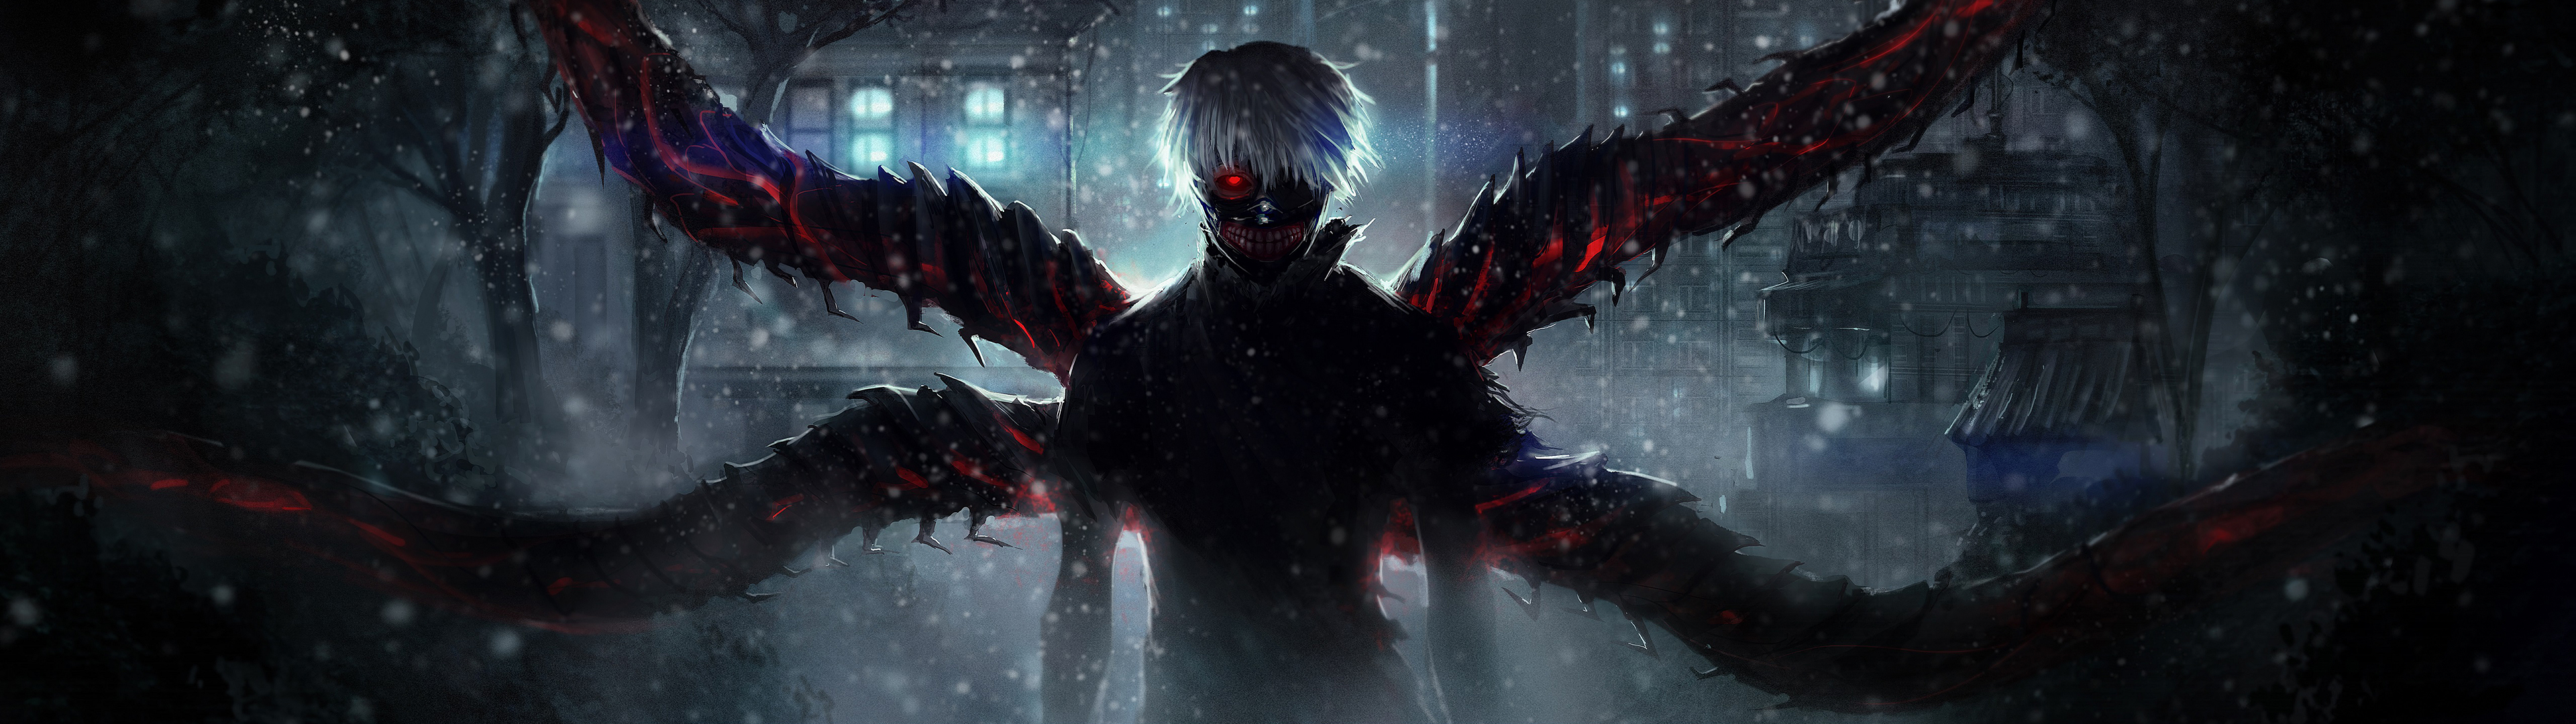 20+ Awesome Dual Monitor Anime Wallpaper Collection